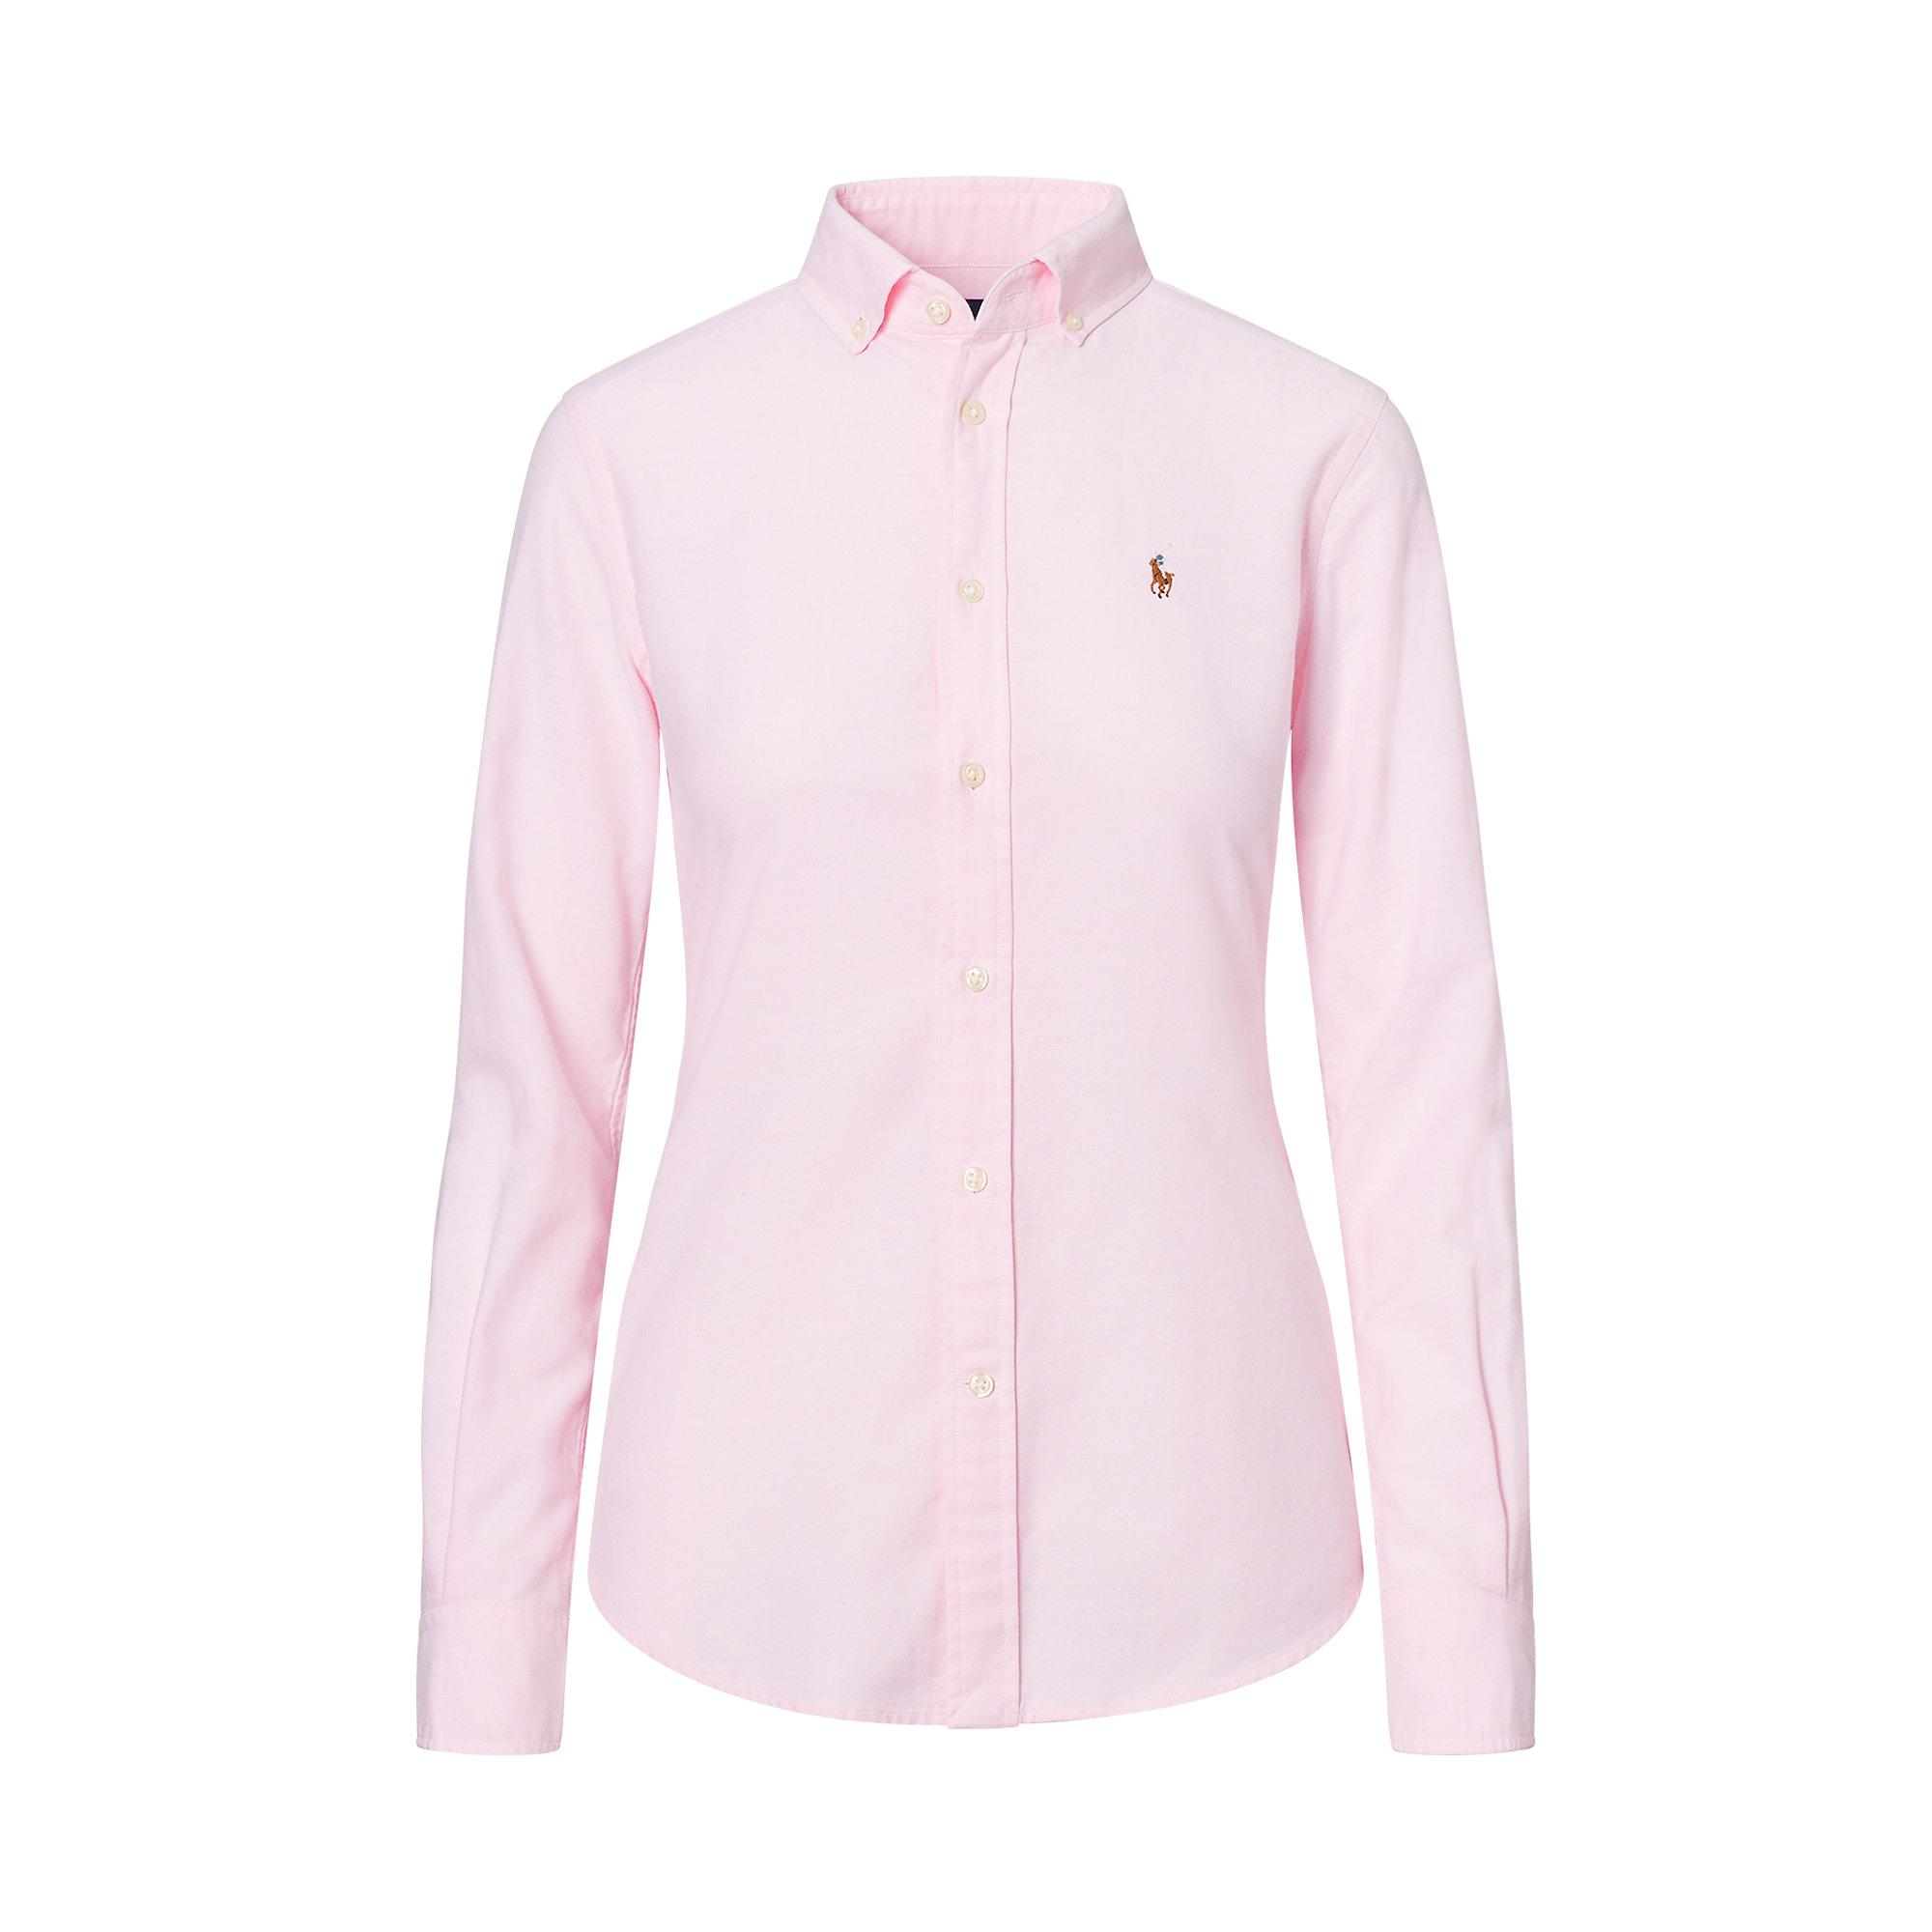 Lyst - Polo Ralph Lauren Slim Fit Cotton Oxford Shirt in Pink